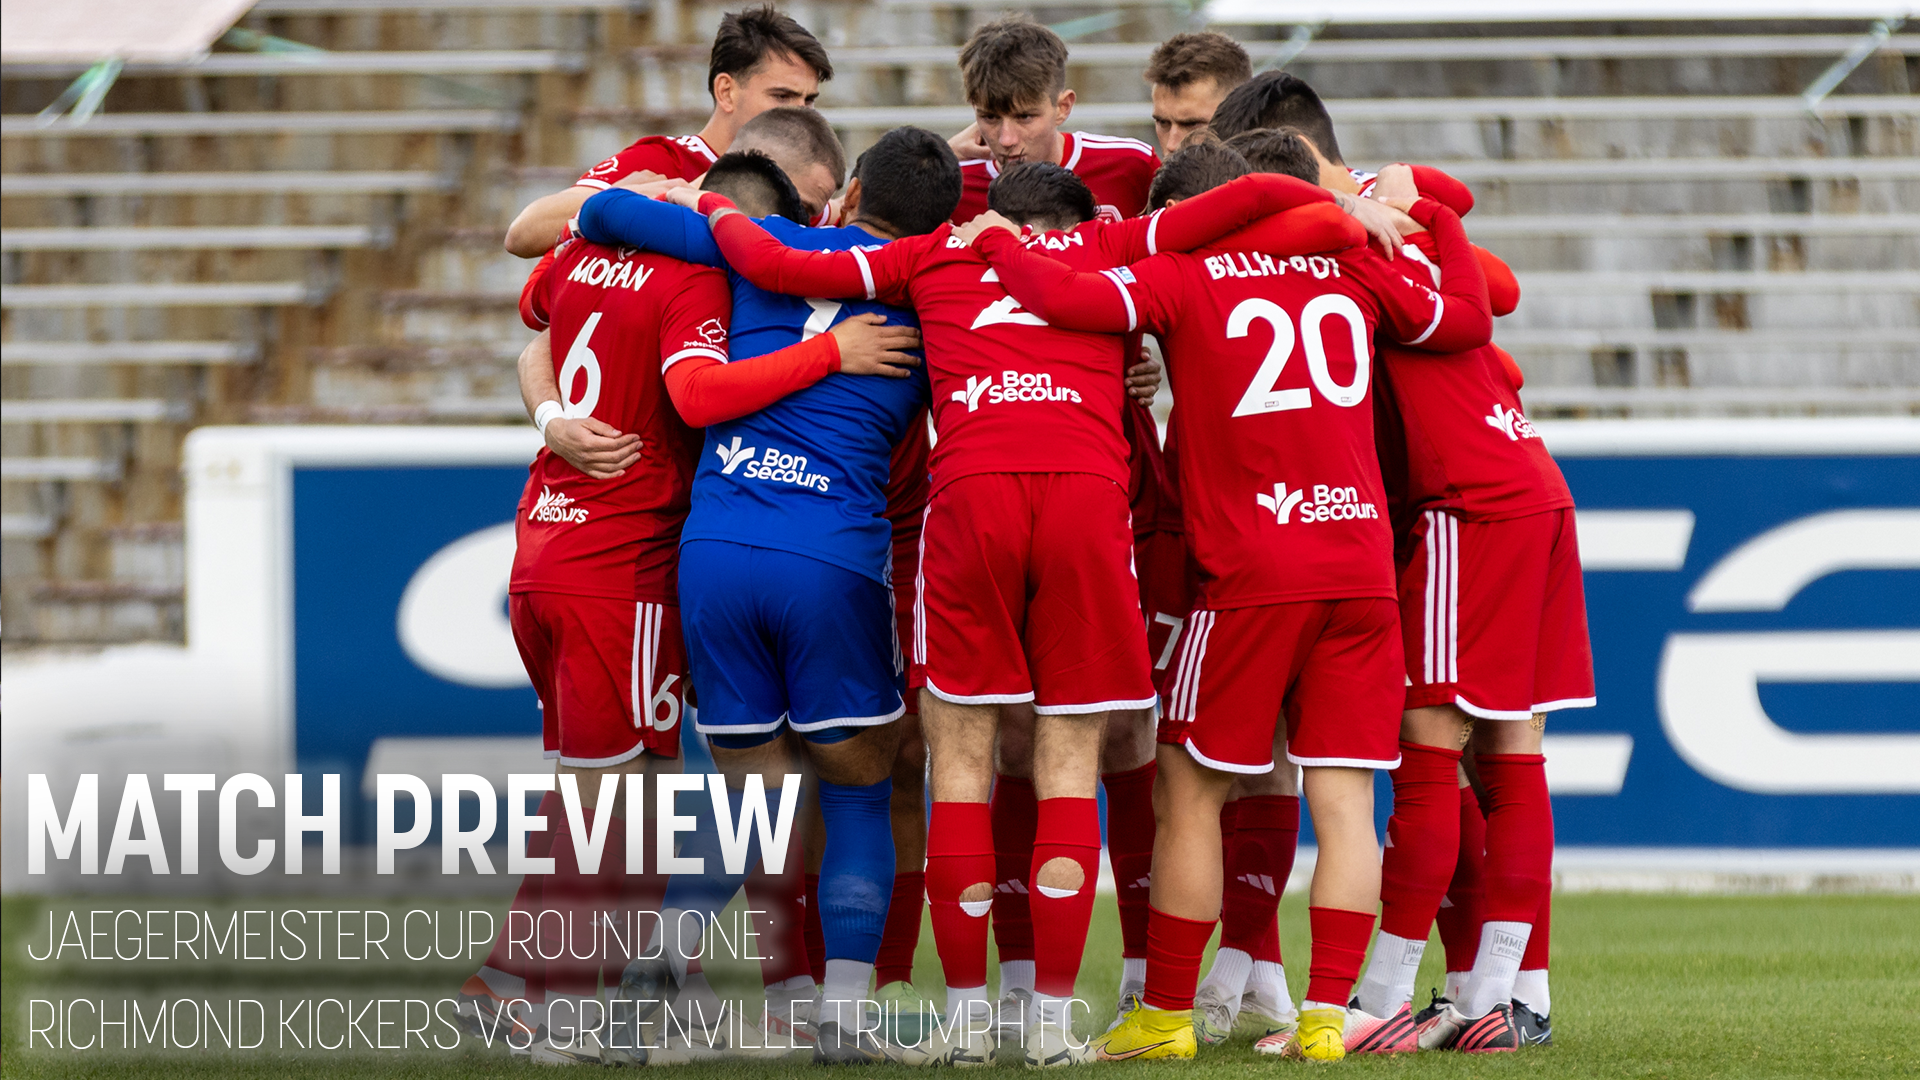 Match Preview: Richmond Kickers travel to take on Greenville Triumph in Jägermeister Cup Round 1 featured image